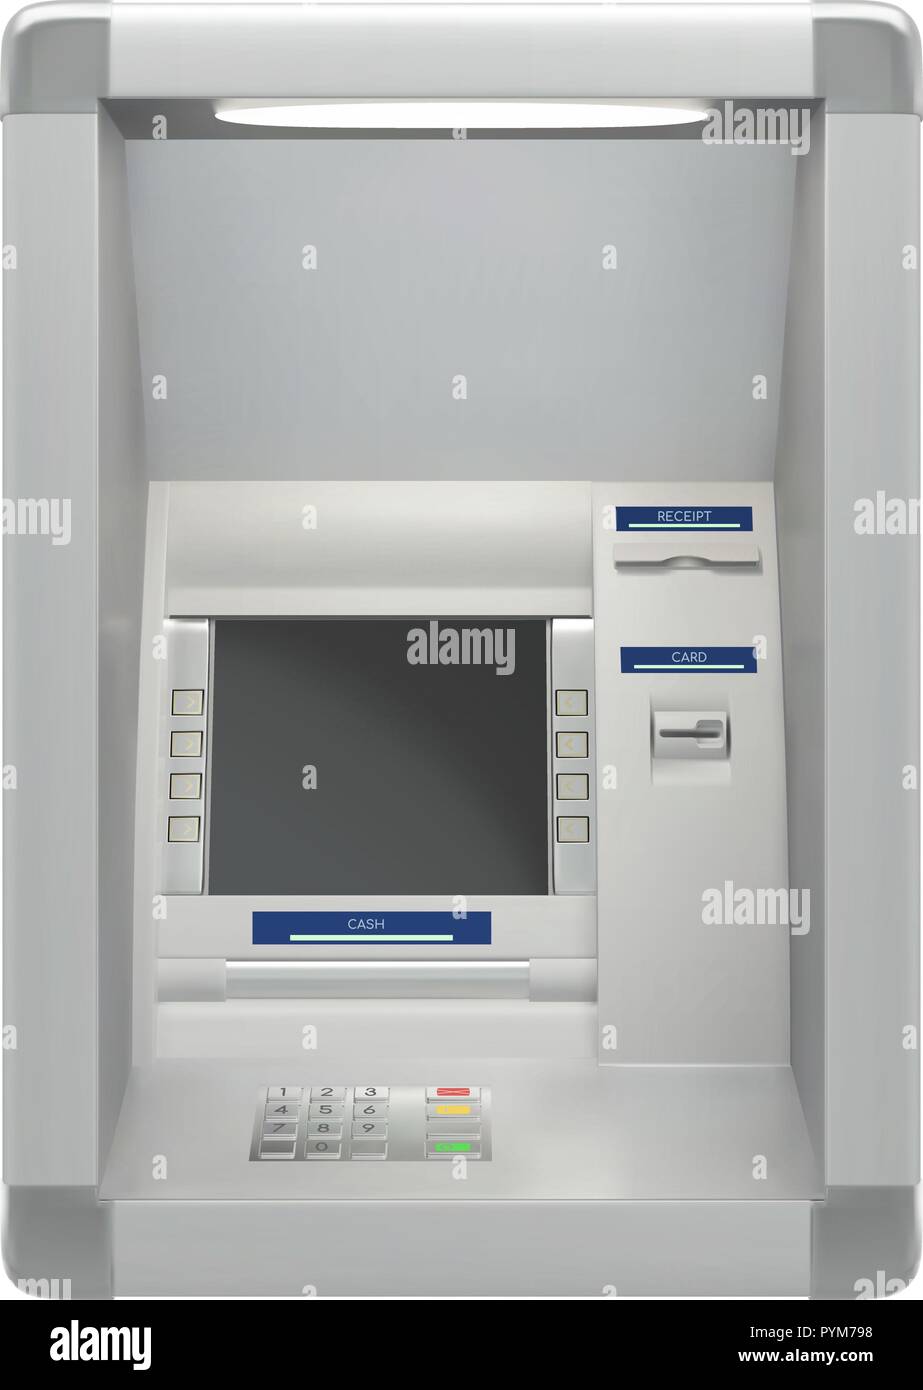 Atm machine with a card reader and display screen, isolated on white background. Vector illustration Stock Vector